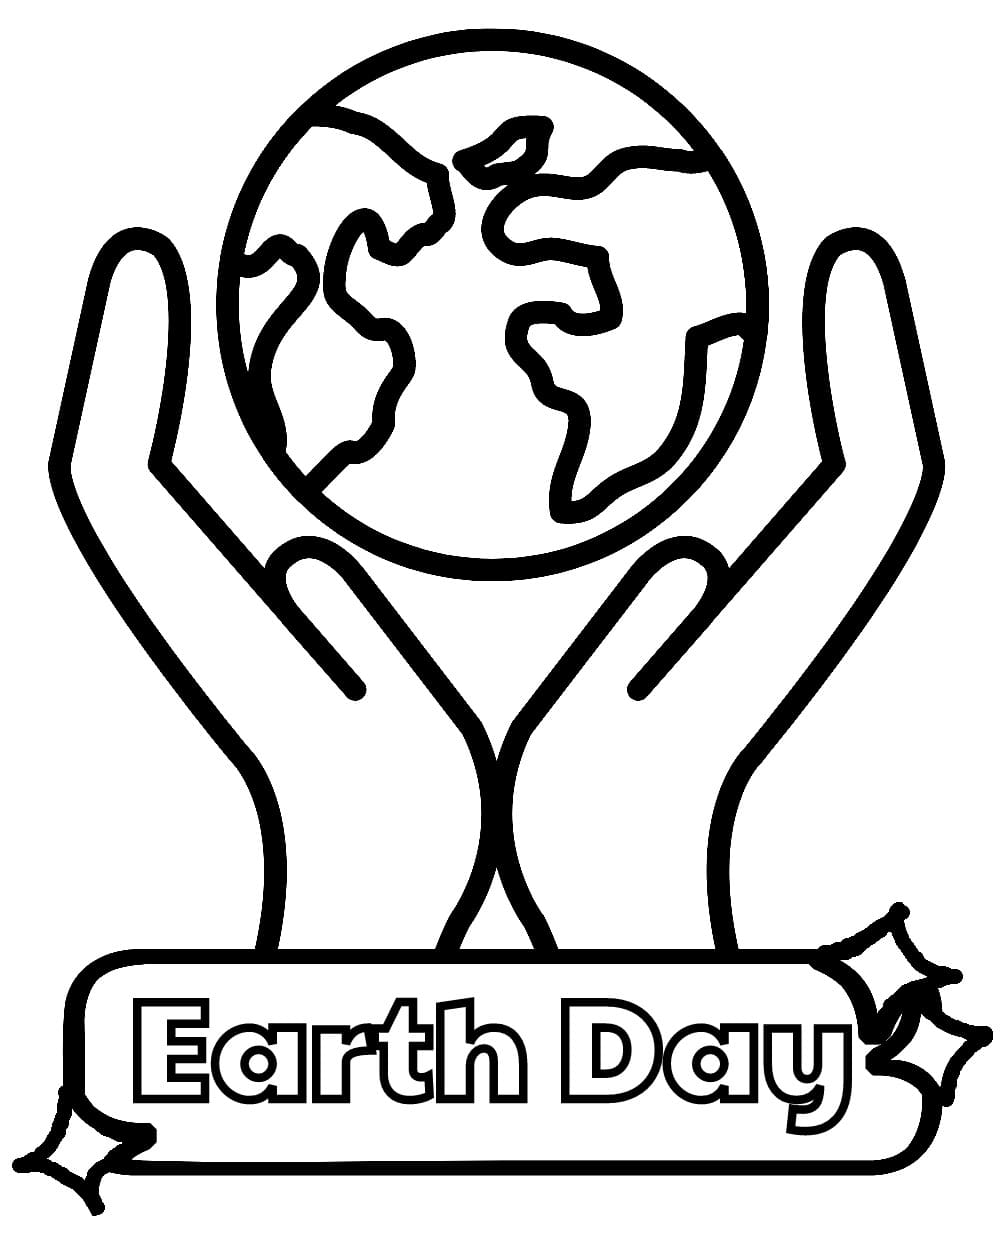 Printable Earth Day coloring page Download, Print or Color Online for